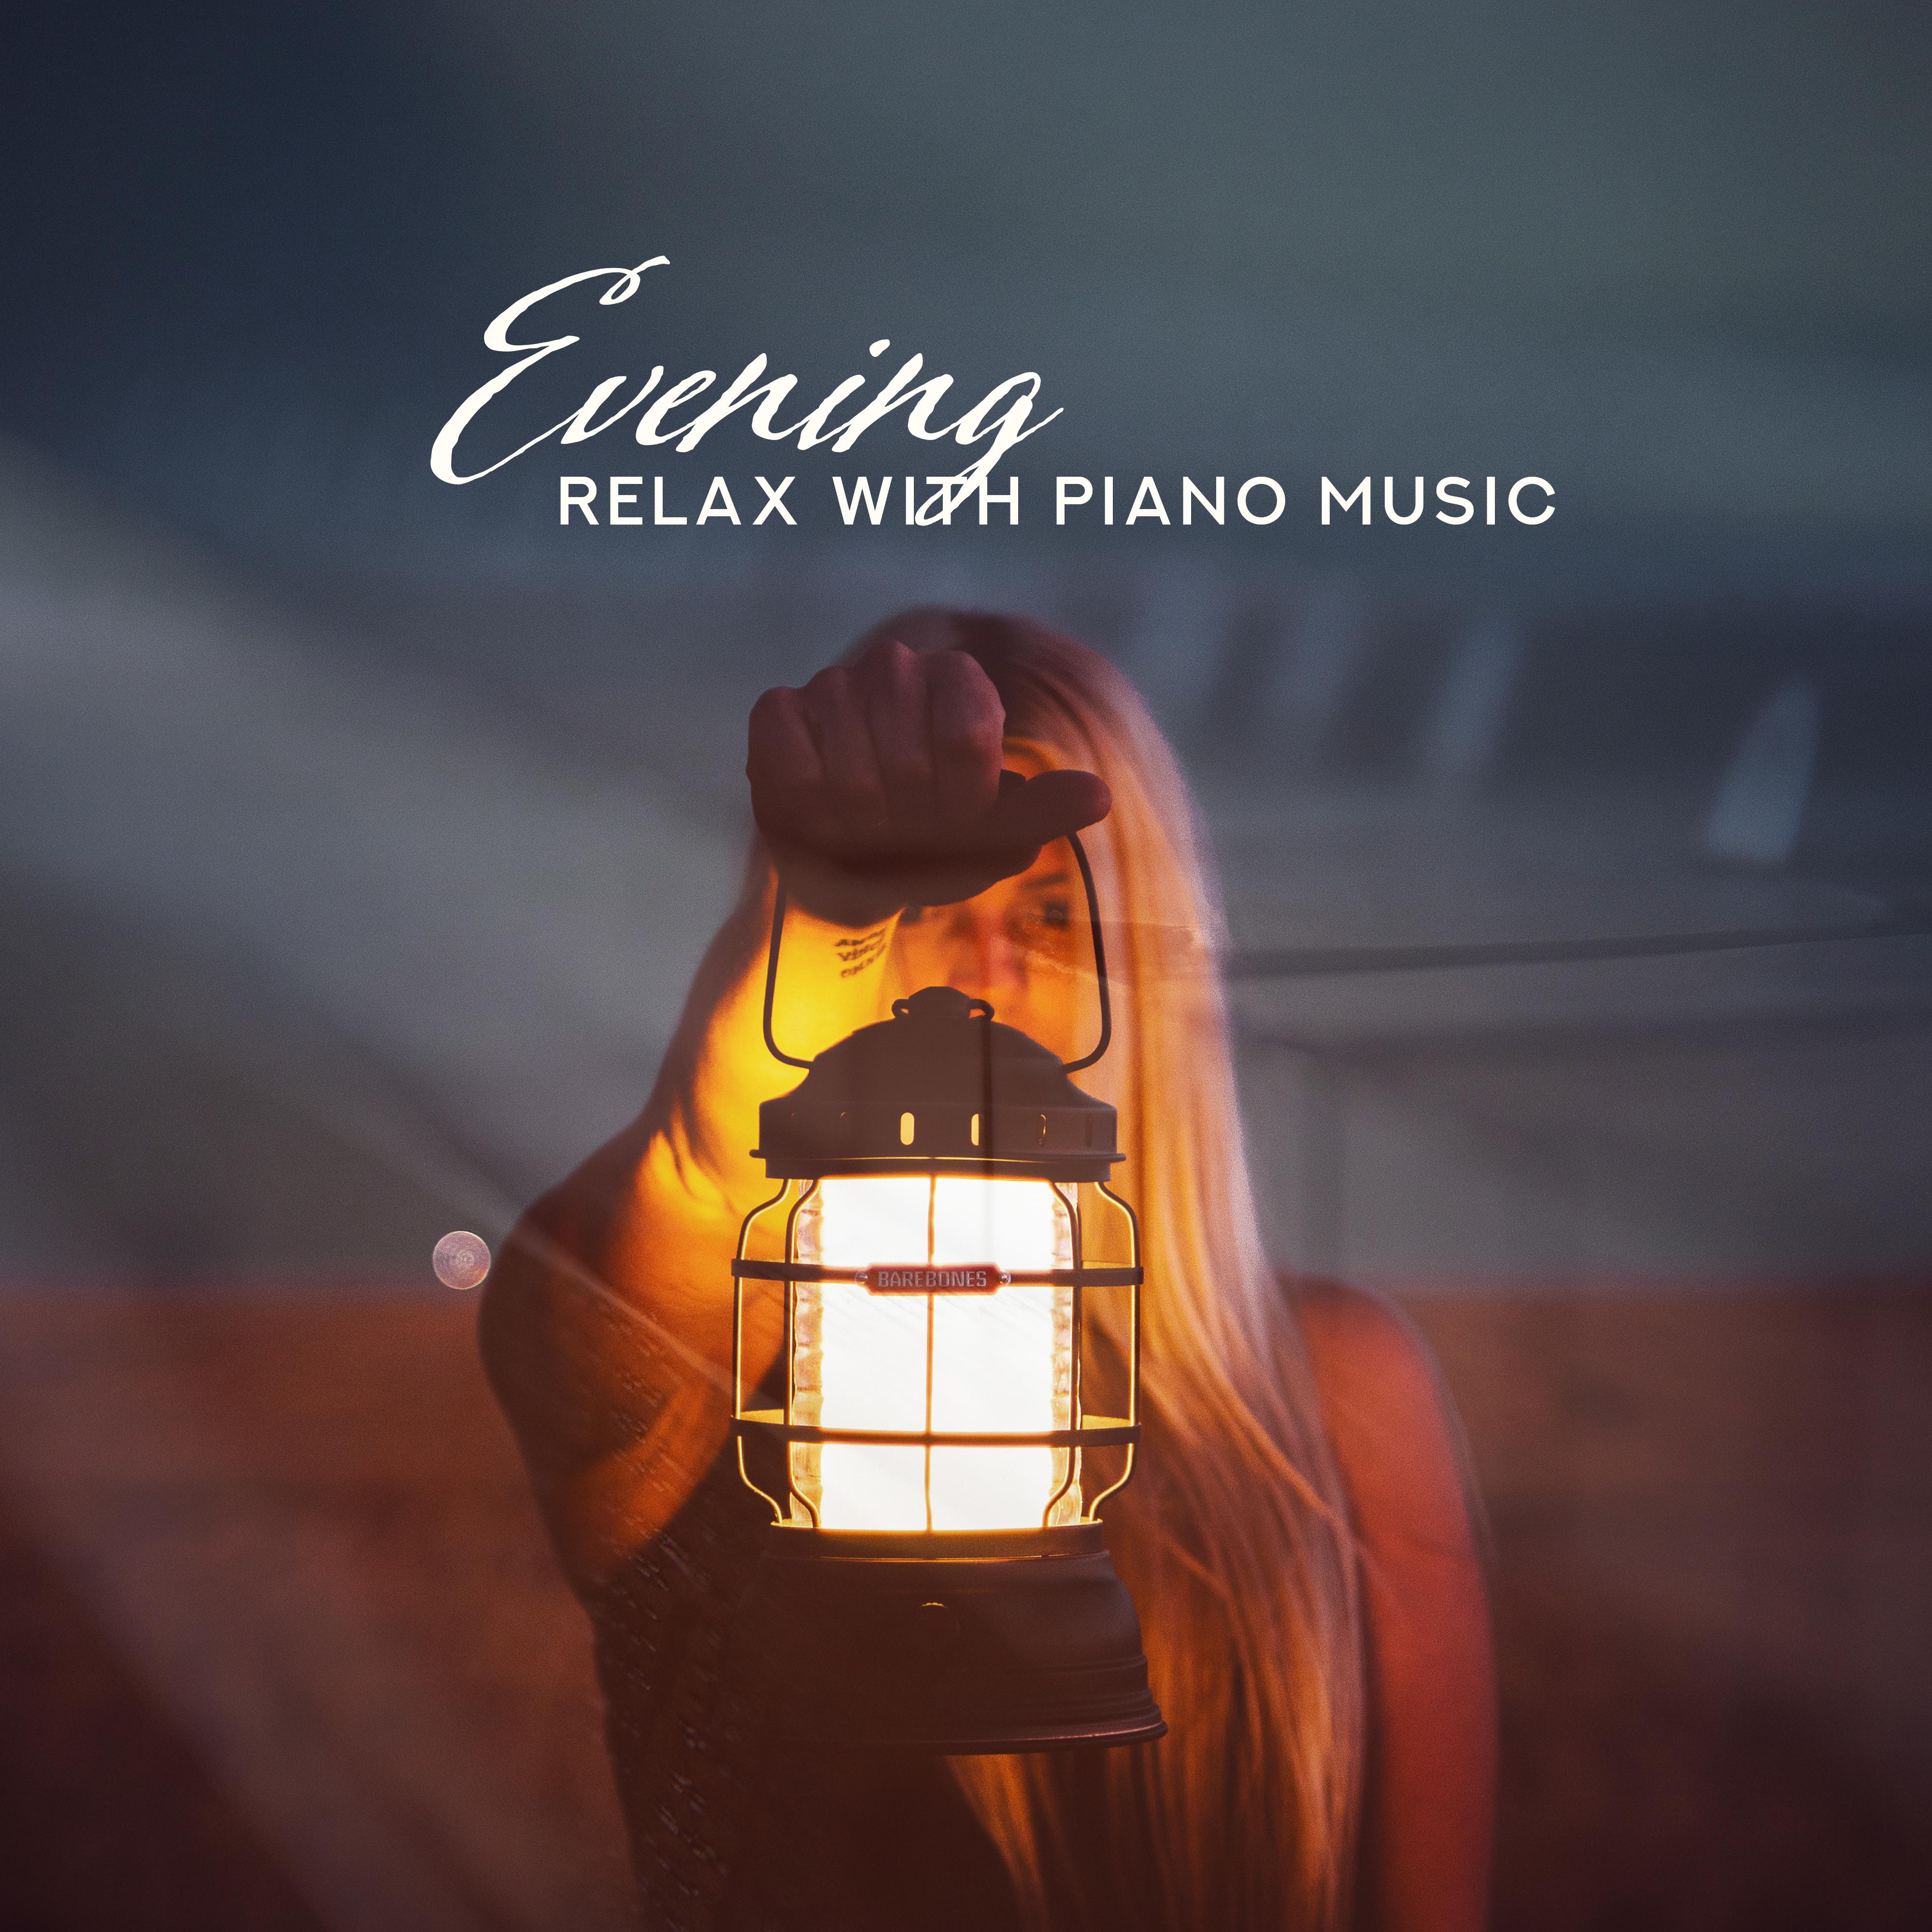 Evening Relax with Piano Music: Calming Sounds After Work, Relaxing Lullabies, Piano Relaxation, Relaxing Jazz Vibrations, Mellow Melodies for Sleep & Rest, Ambient Jazz